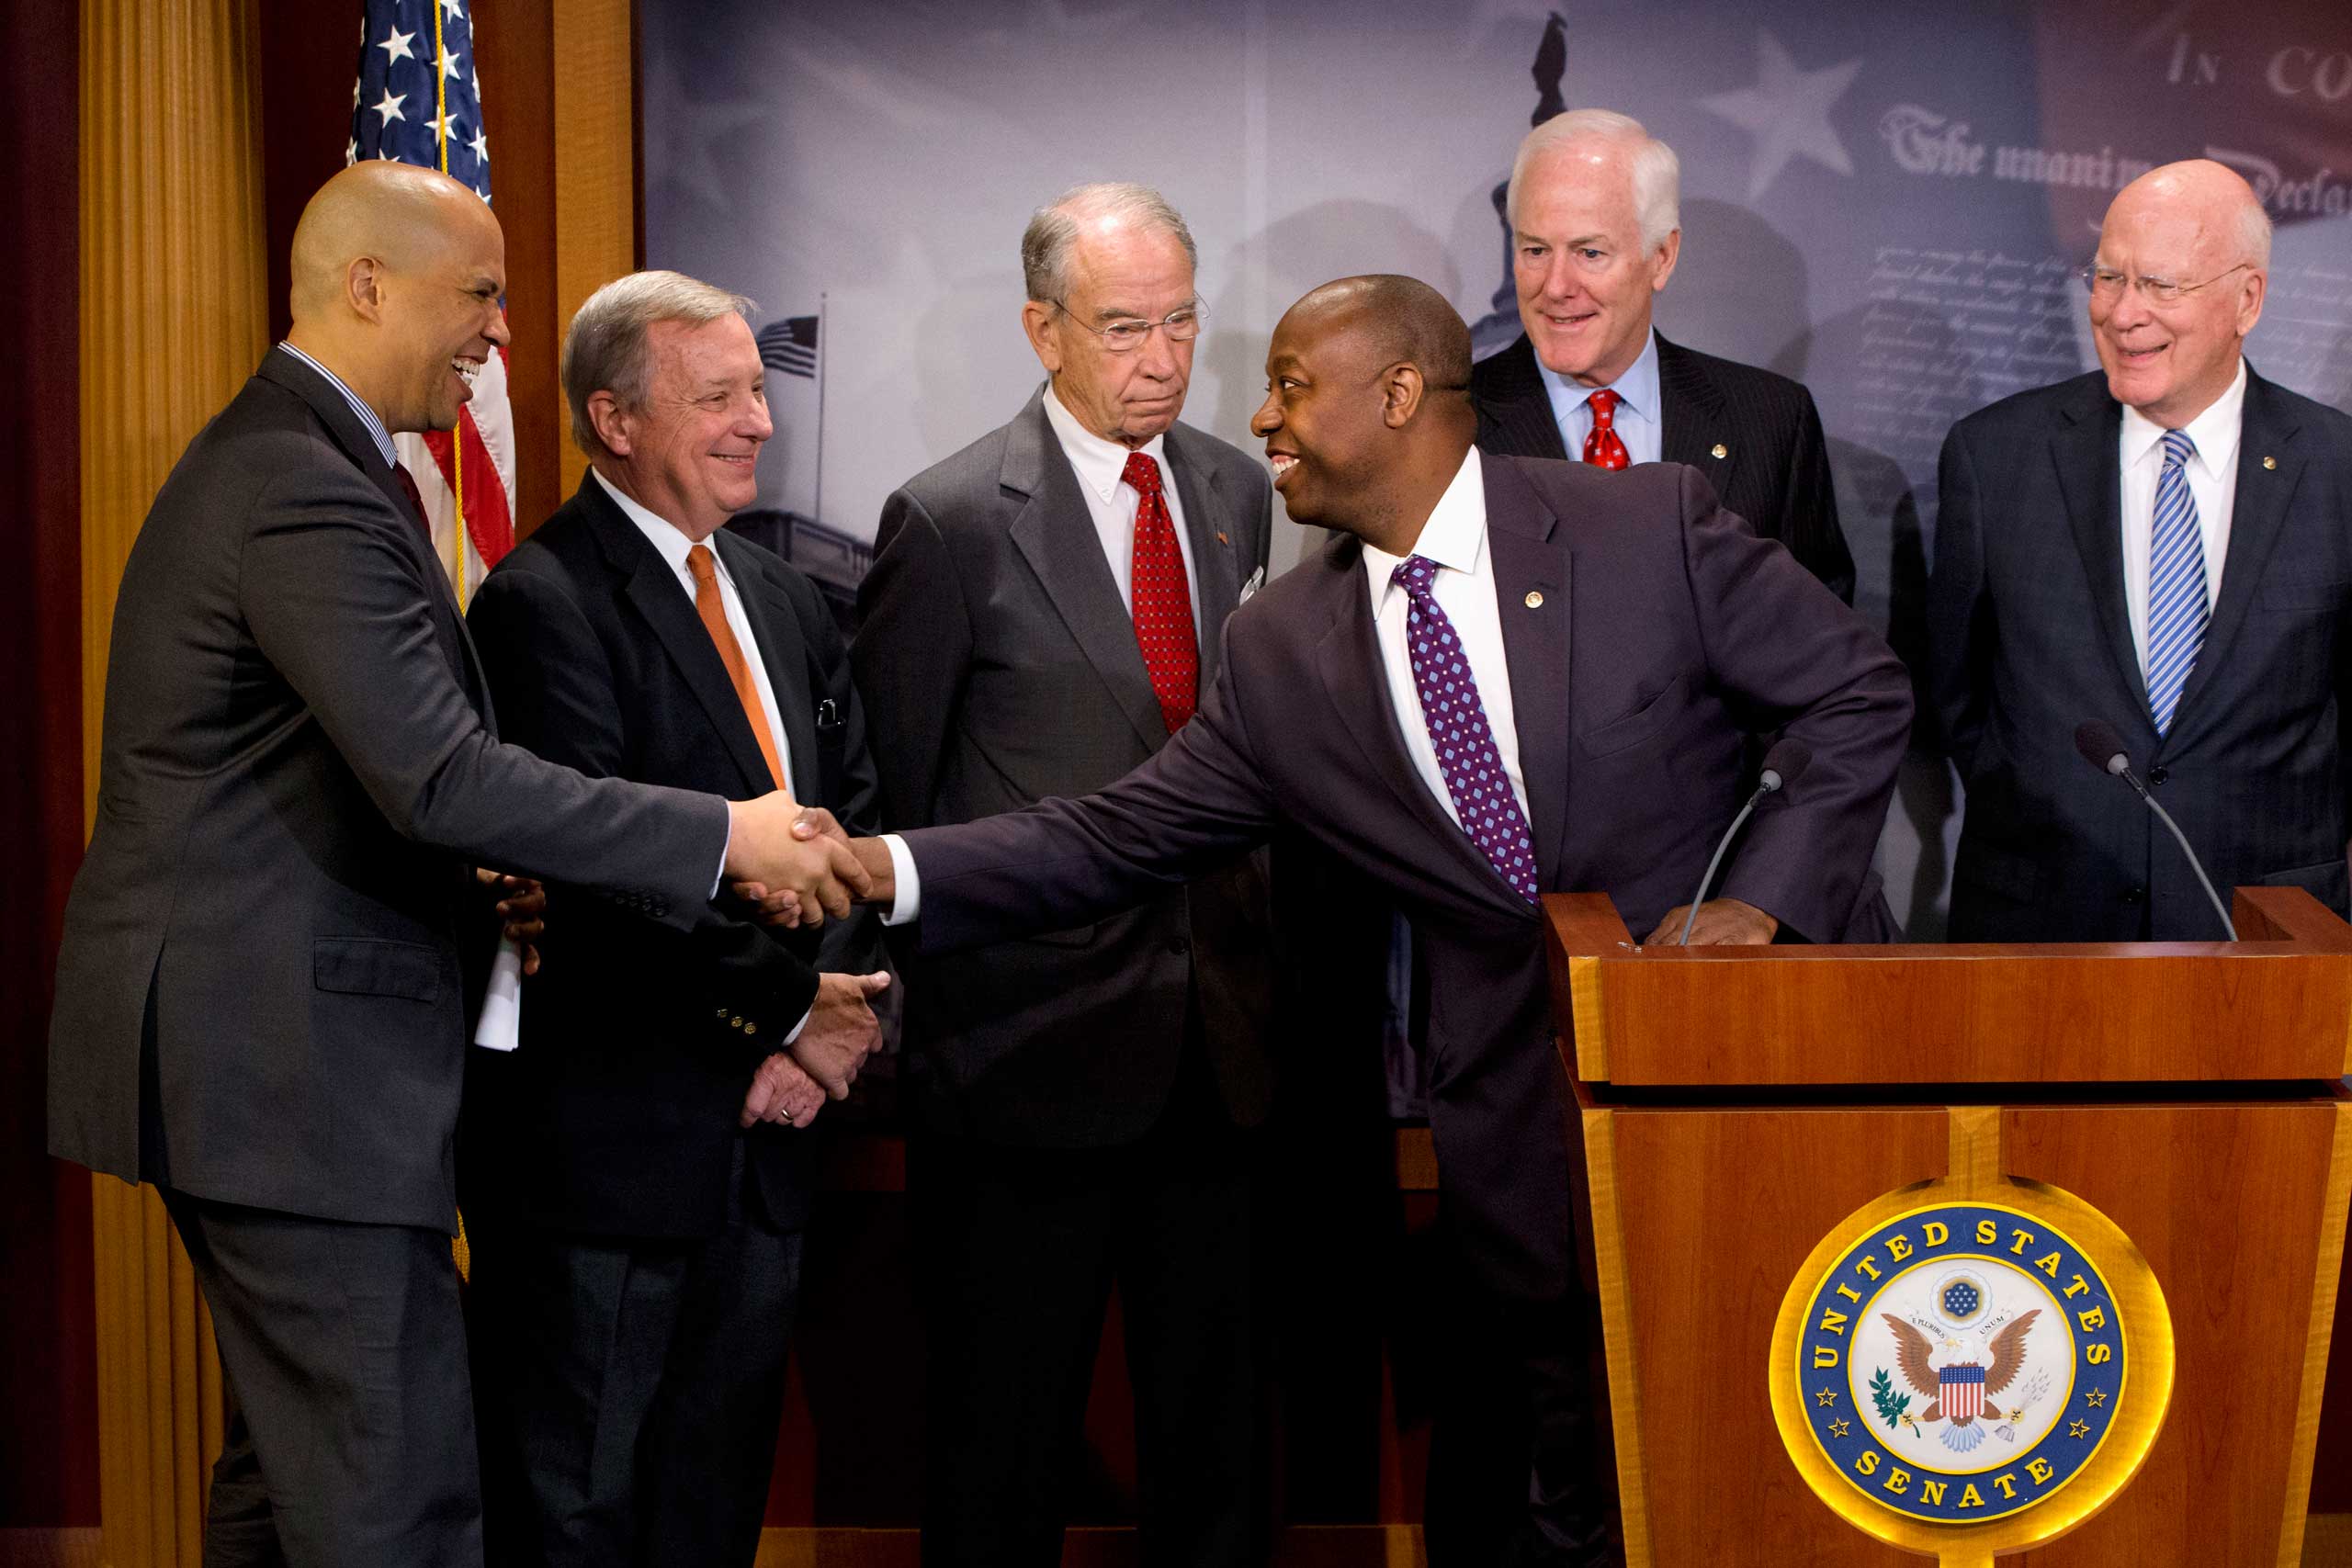 Sen. Tim Scott, R-S.C., leans from the podium to shake hands with Sen. Cory Booker, D-N.J., while speaking about criminal justice reform with a bipartisan group of senators during a news conference on Capitol Hill in Washington, Oct. 1, 2015, (Jacquelyn Martin—AP)